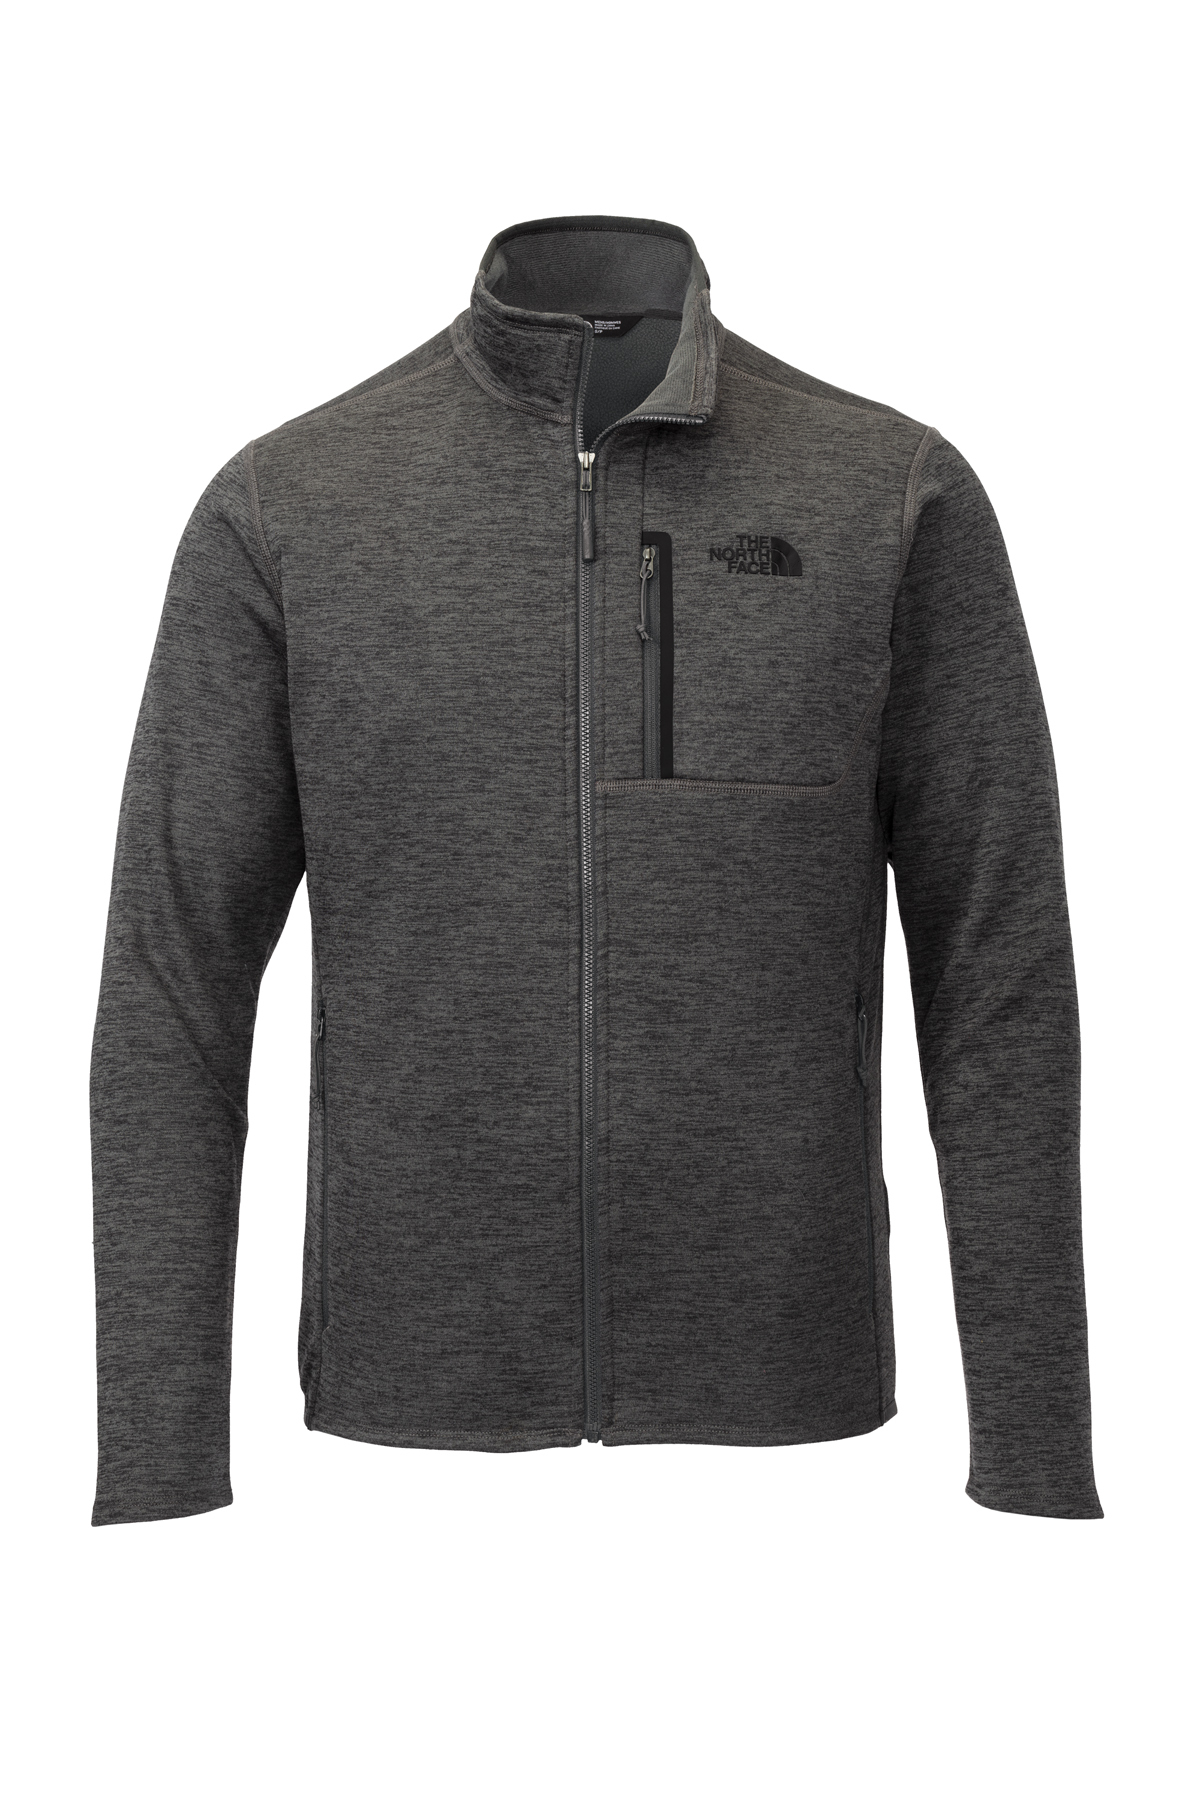 The North Face Skyline Full-Zip Fleece Jacket | Product | Company Casuals